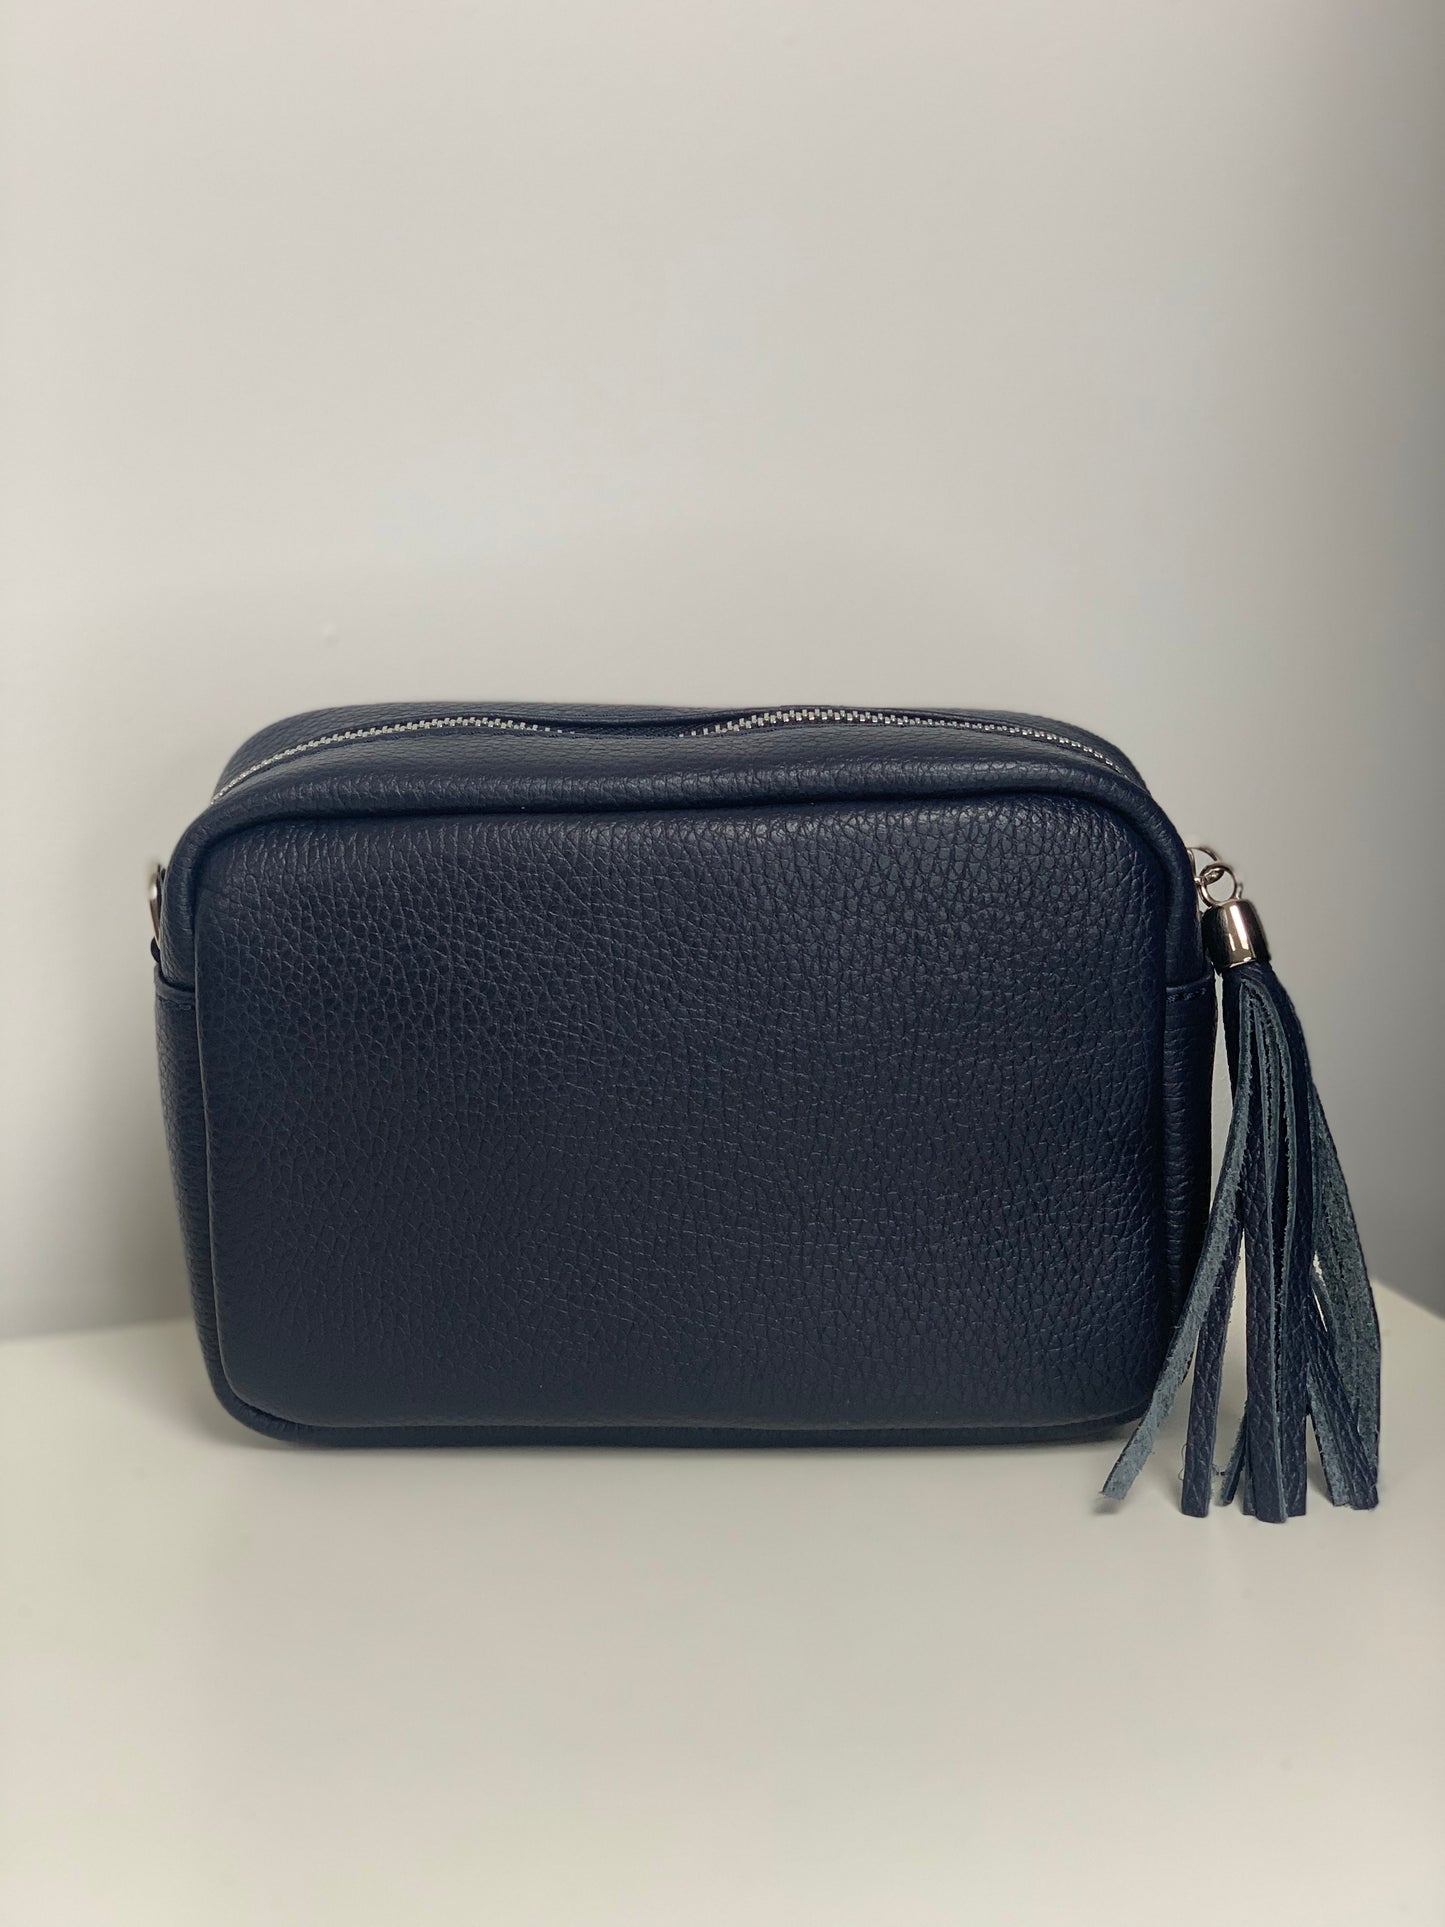 Navy Camera Bag - Real Leather